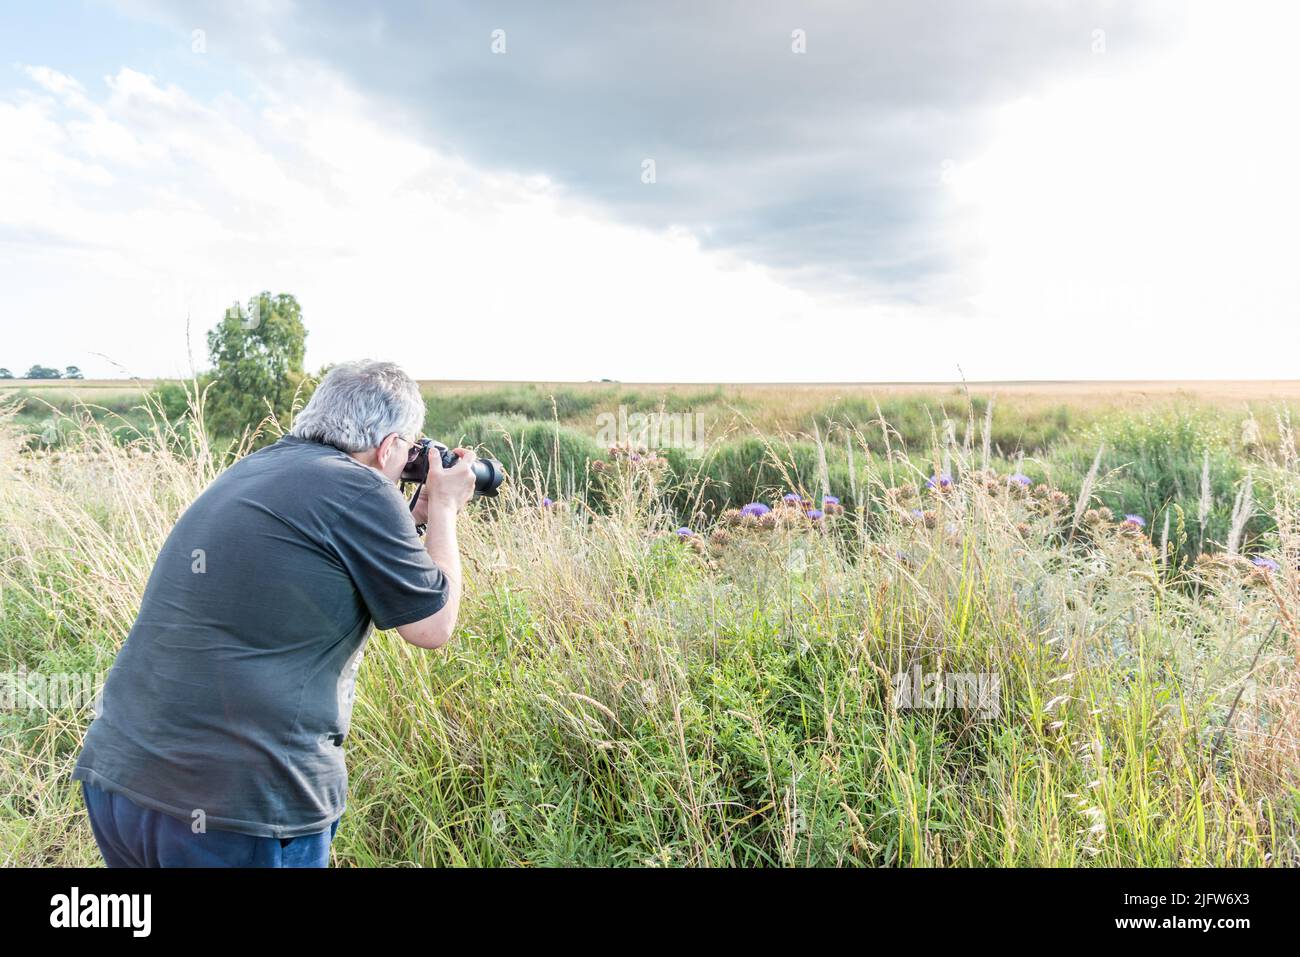 Rear view of a gray haired mature man taking camera shots of thistles in a field with a cloudy sky. Stock Photo